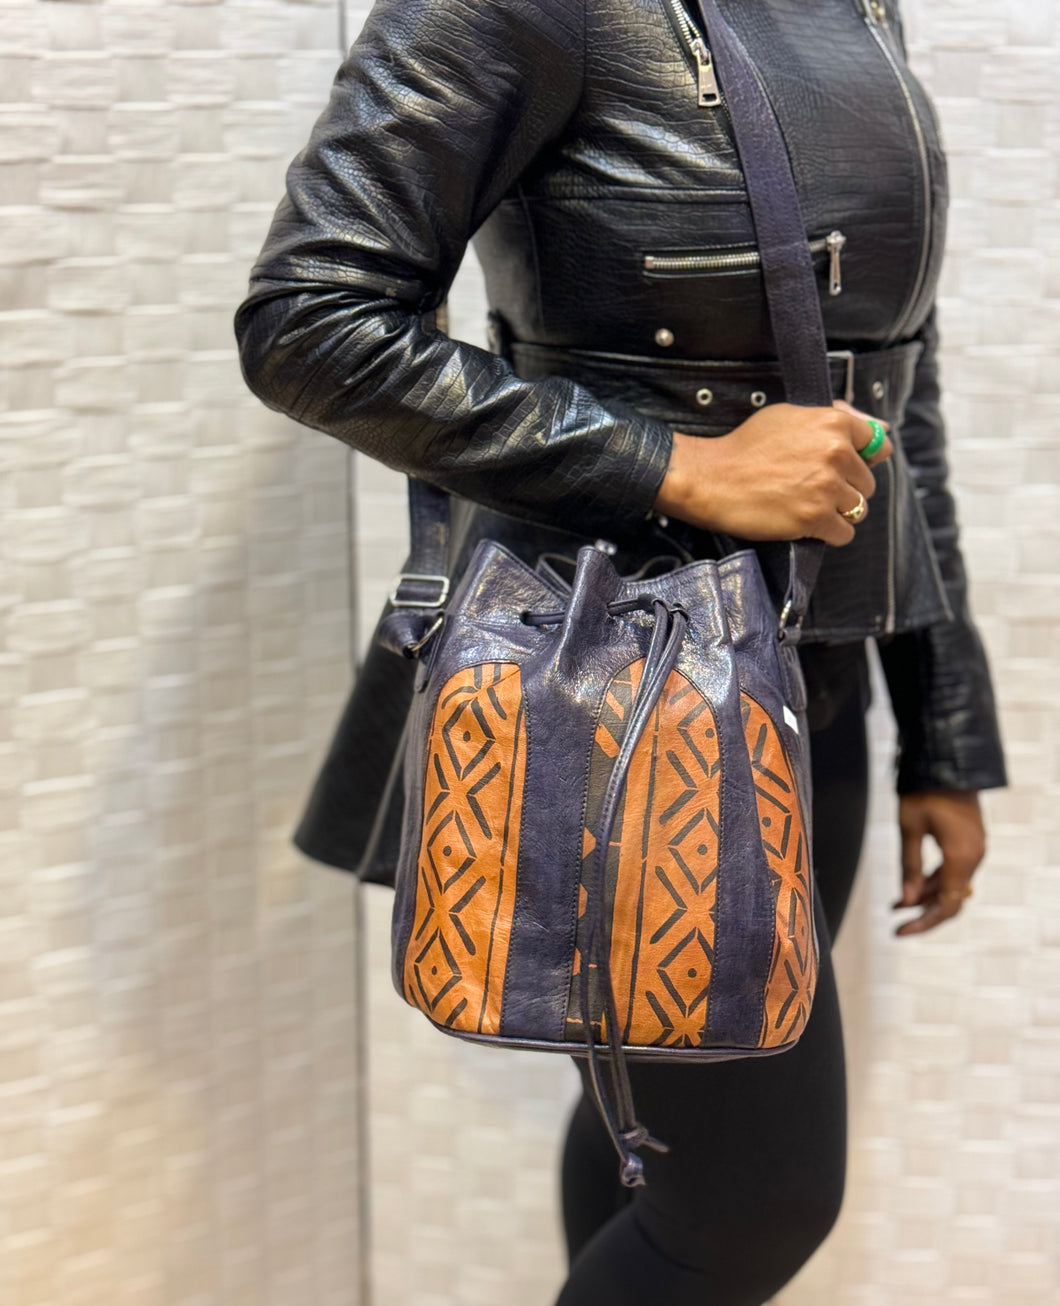 Traditional Treasures: Unique Handmade Leather Bag from Mali